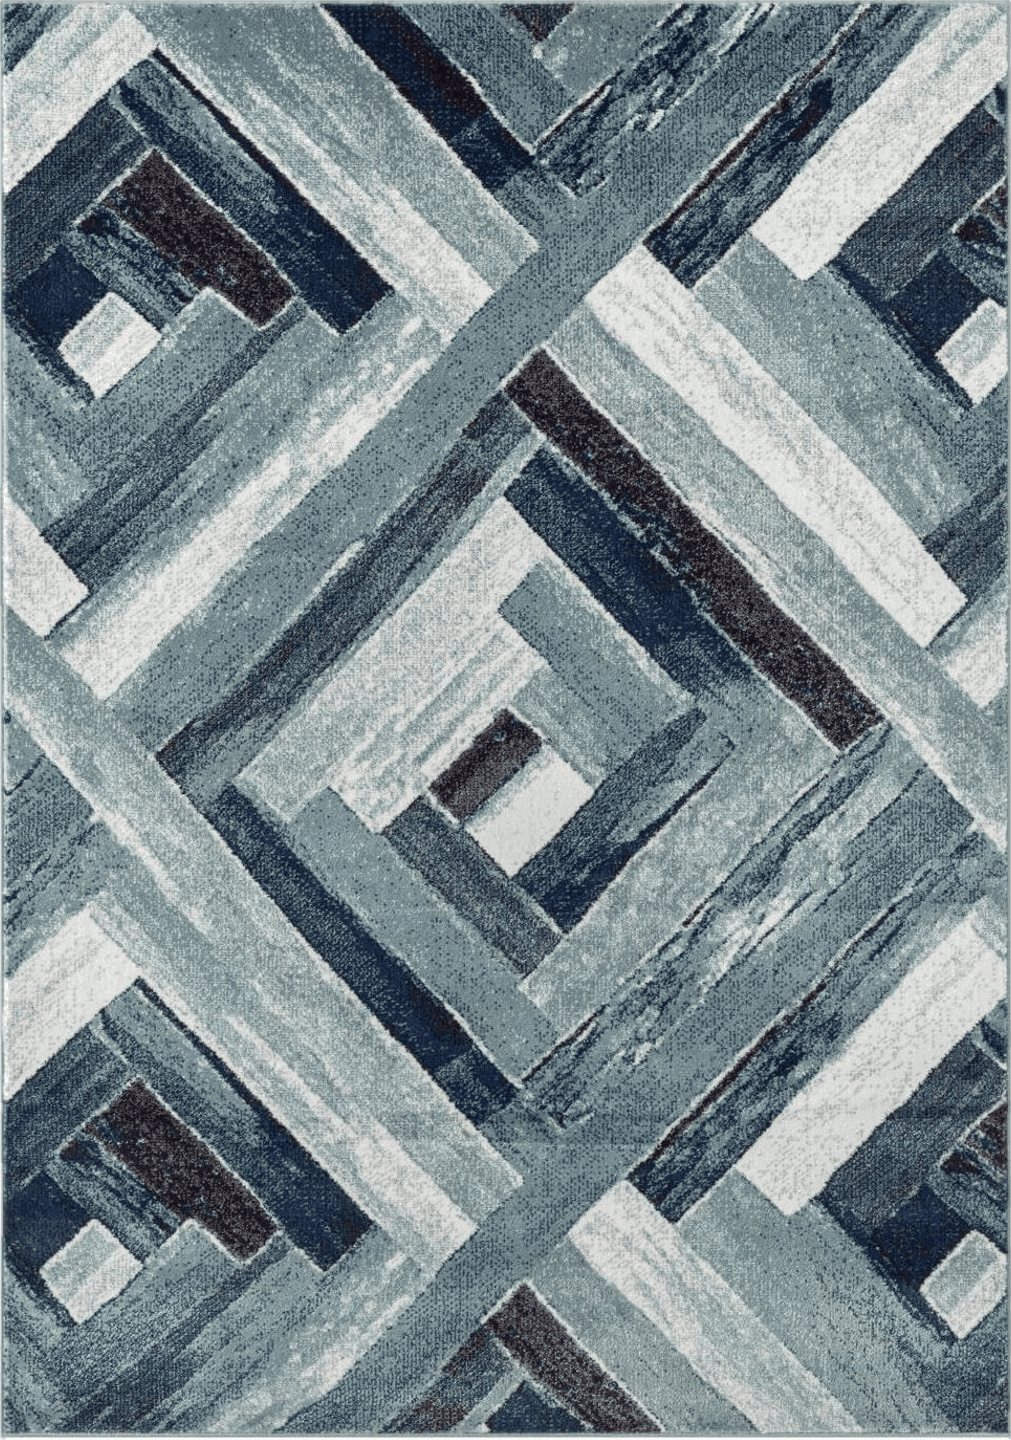 LUXE WEAVERS Modern Abstract Wood Carpet Geometric Blue 8x10 Area Rug